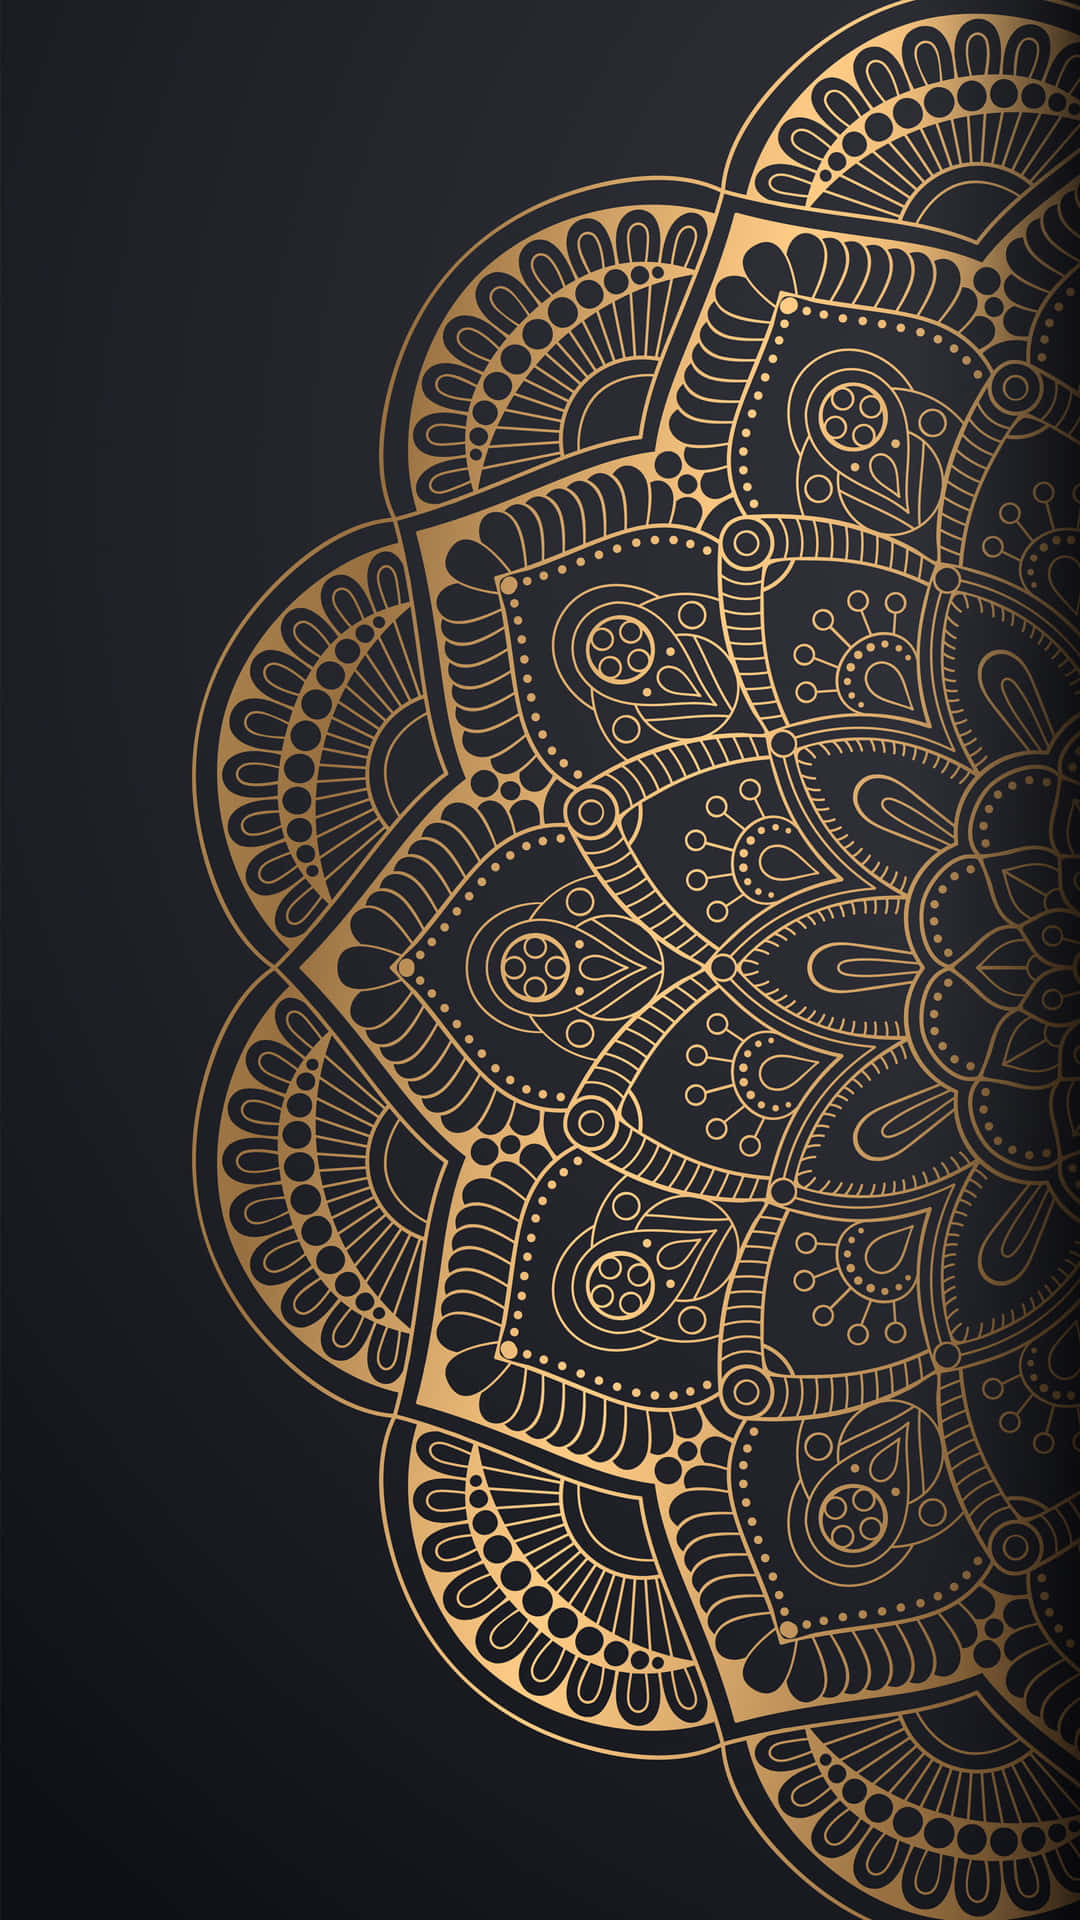 Black And Gold Wallpaper Pictures  Download Free Images on Unsplash